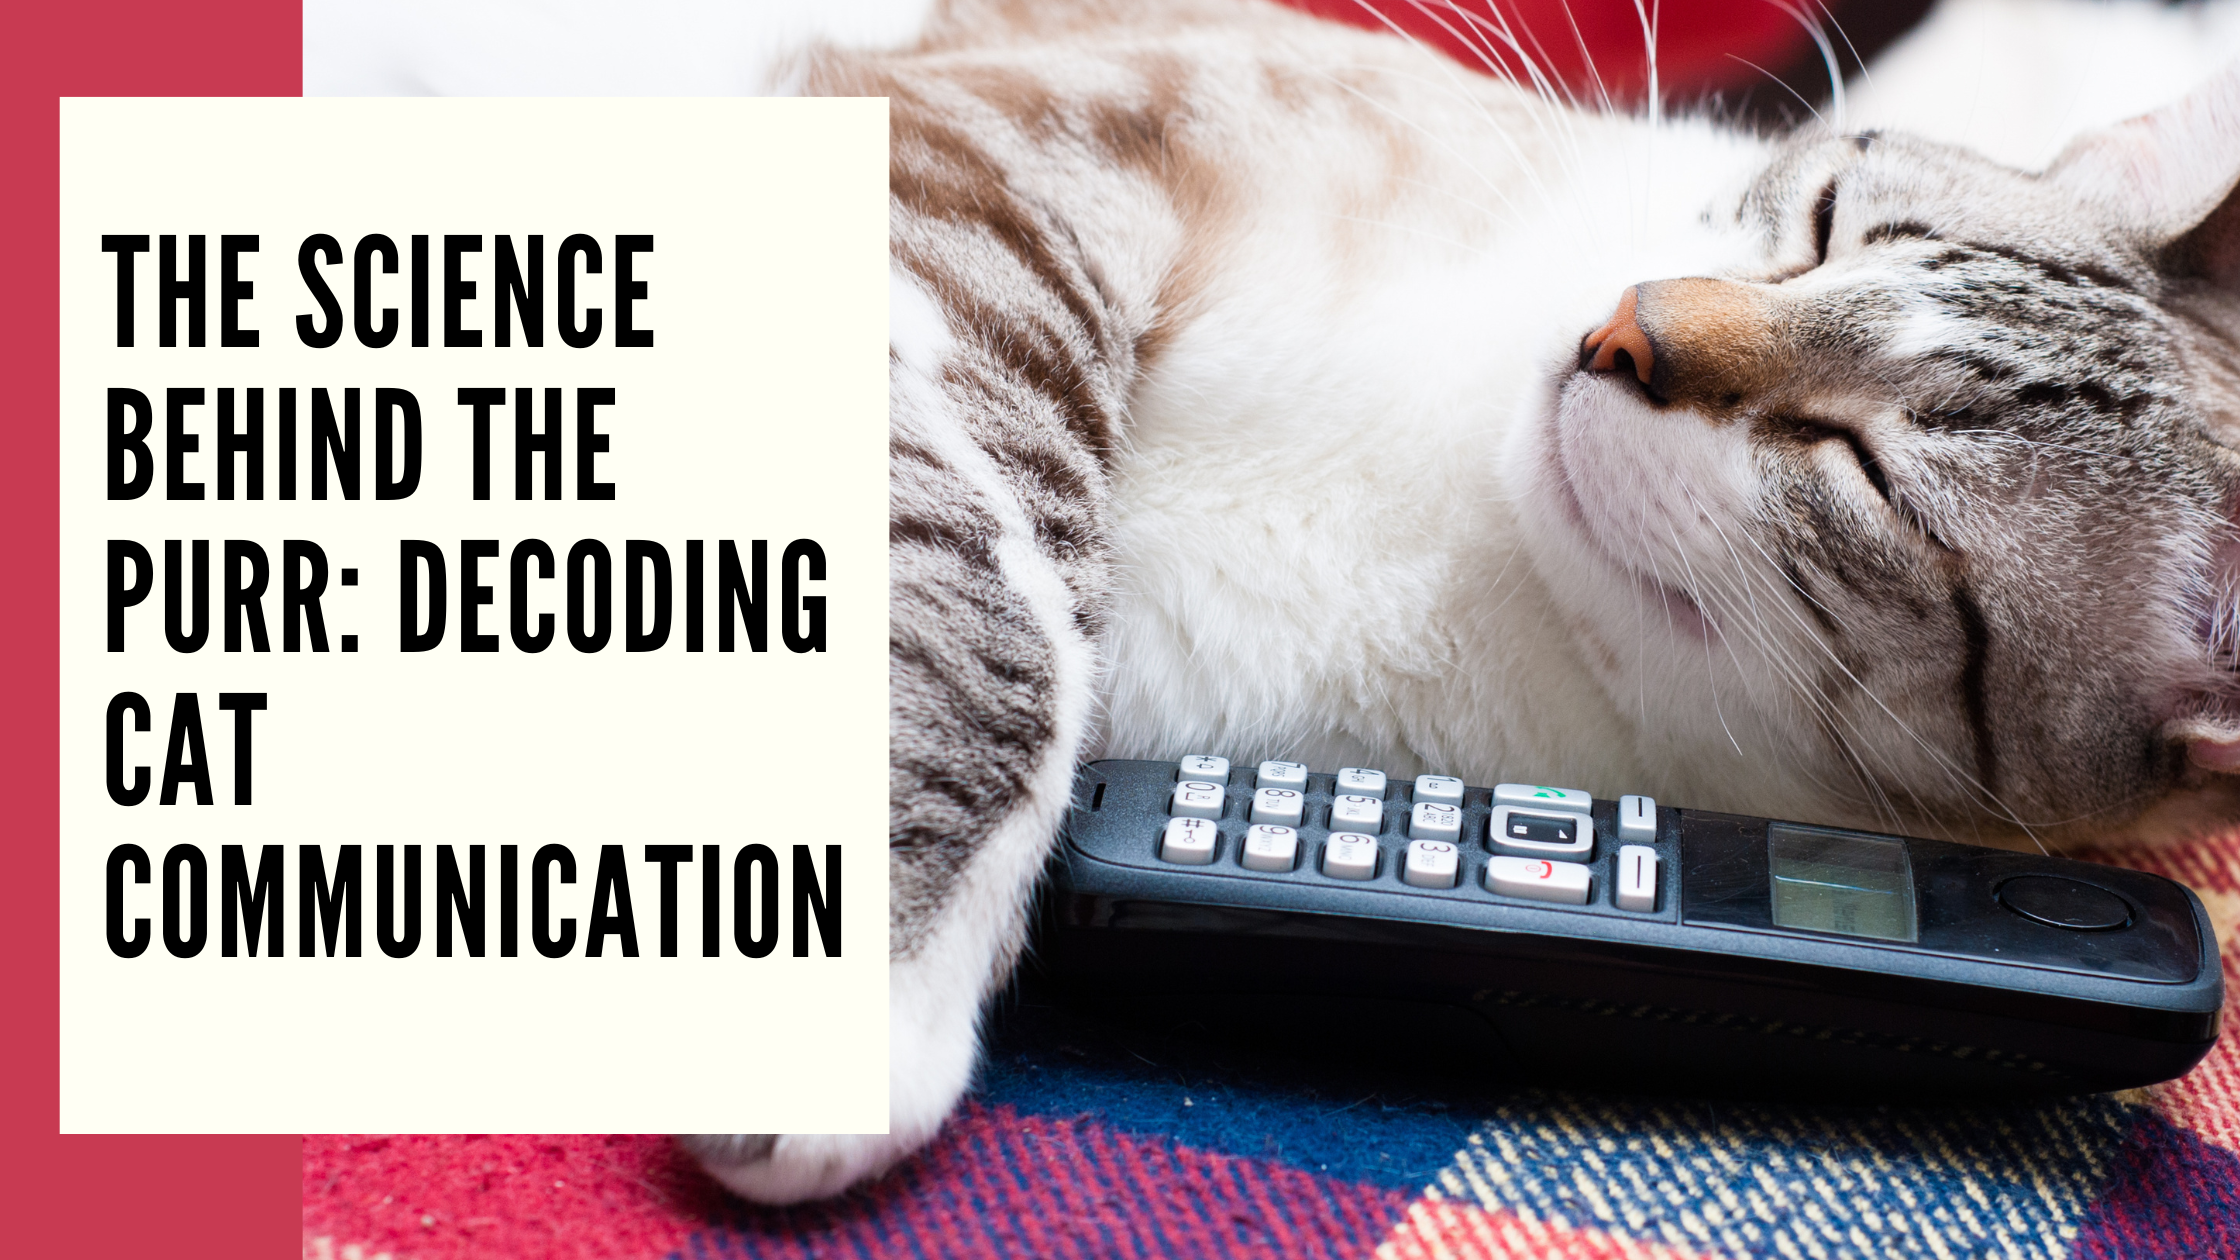 The Science Behind the Purr Decoding Cat Communication